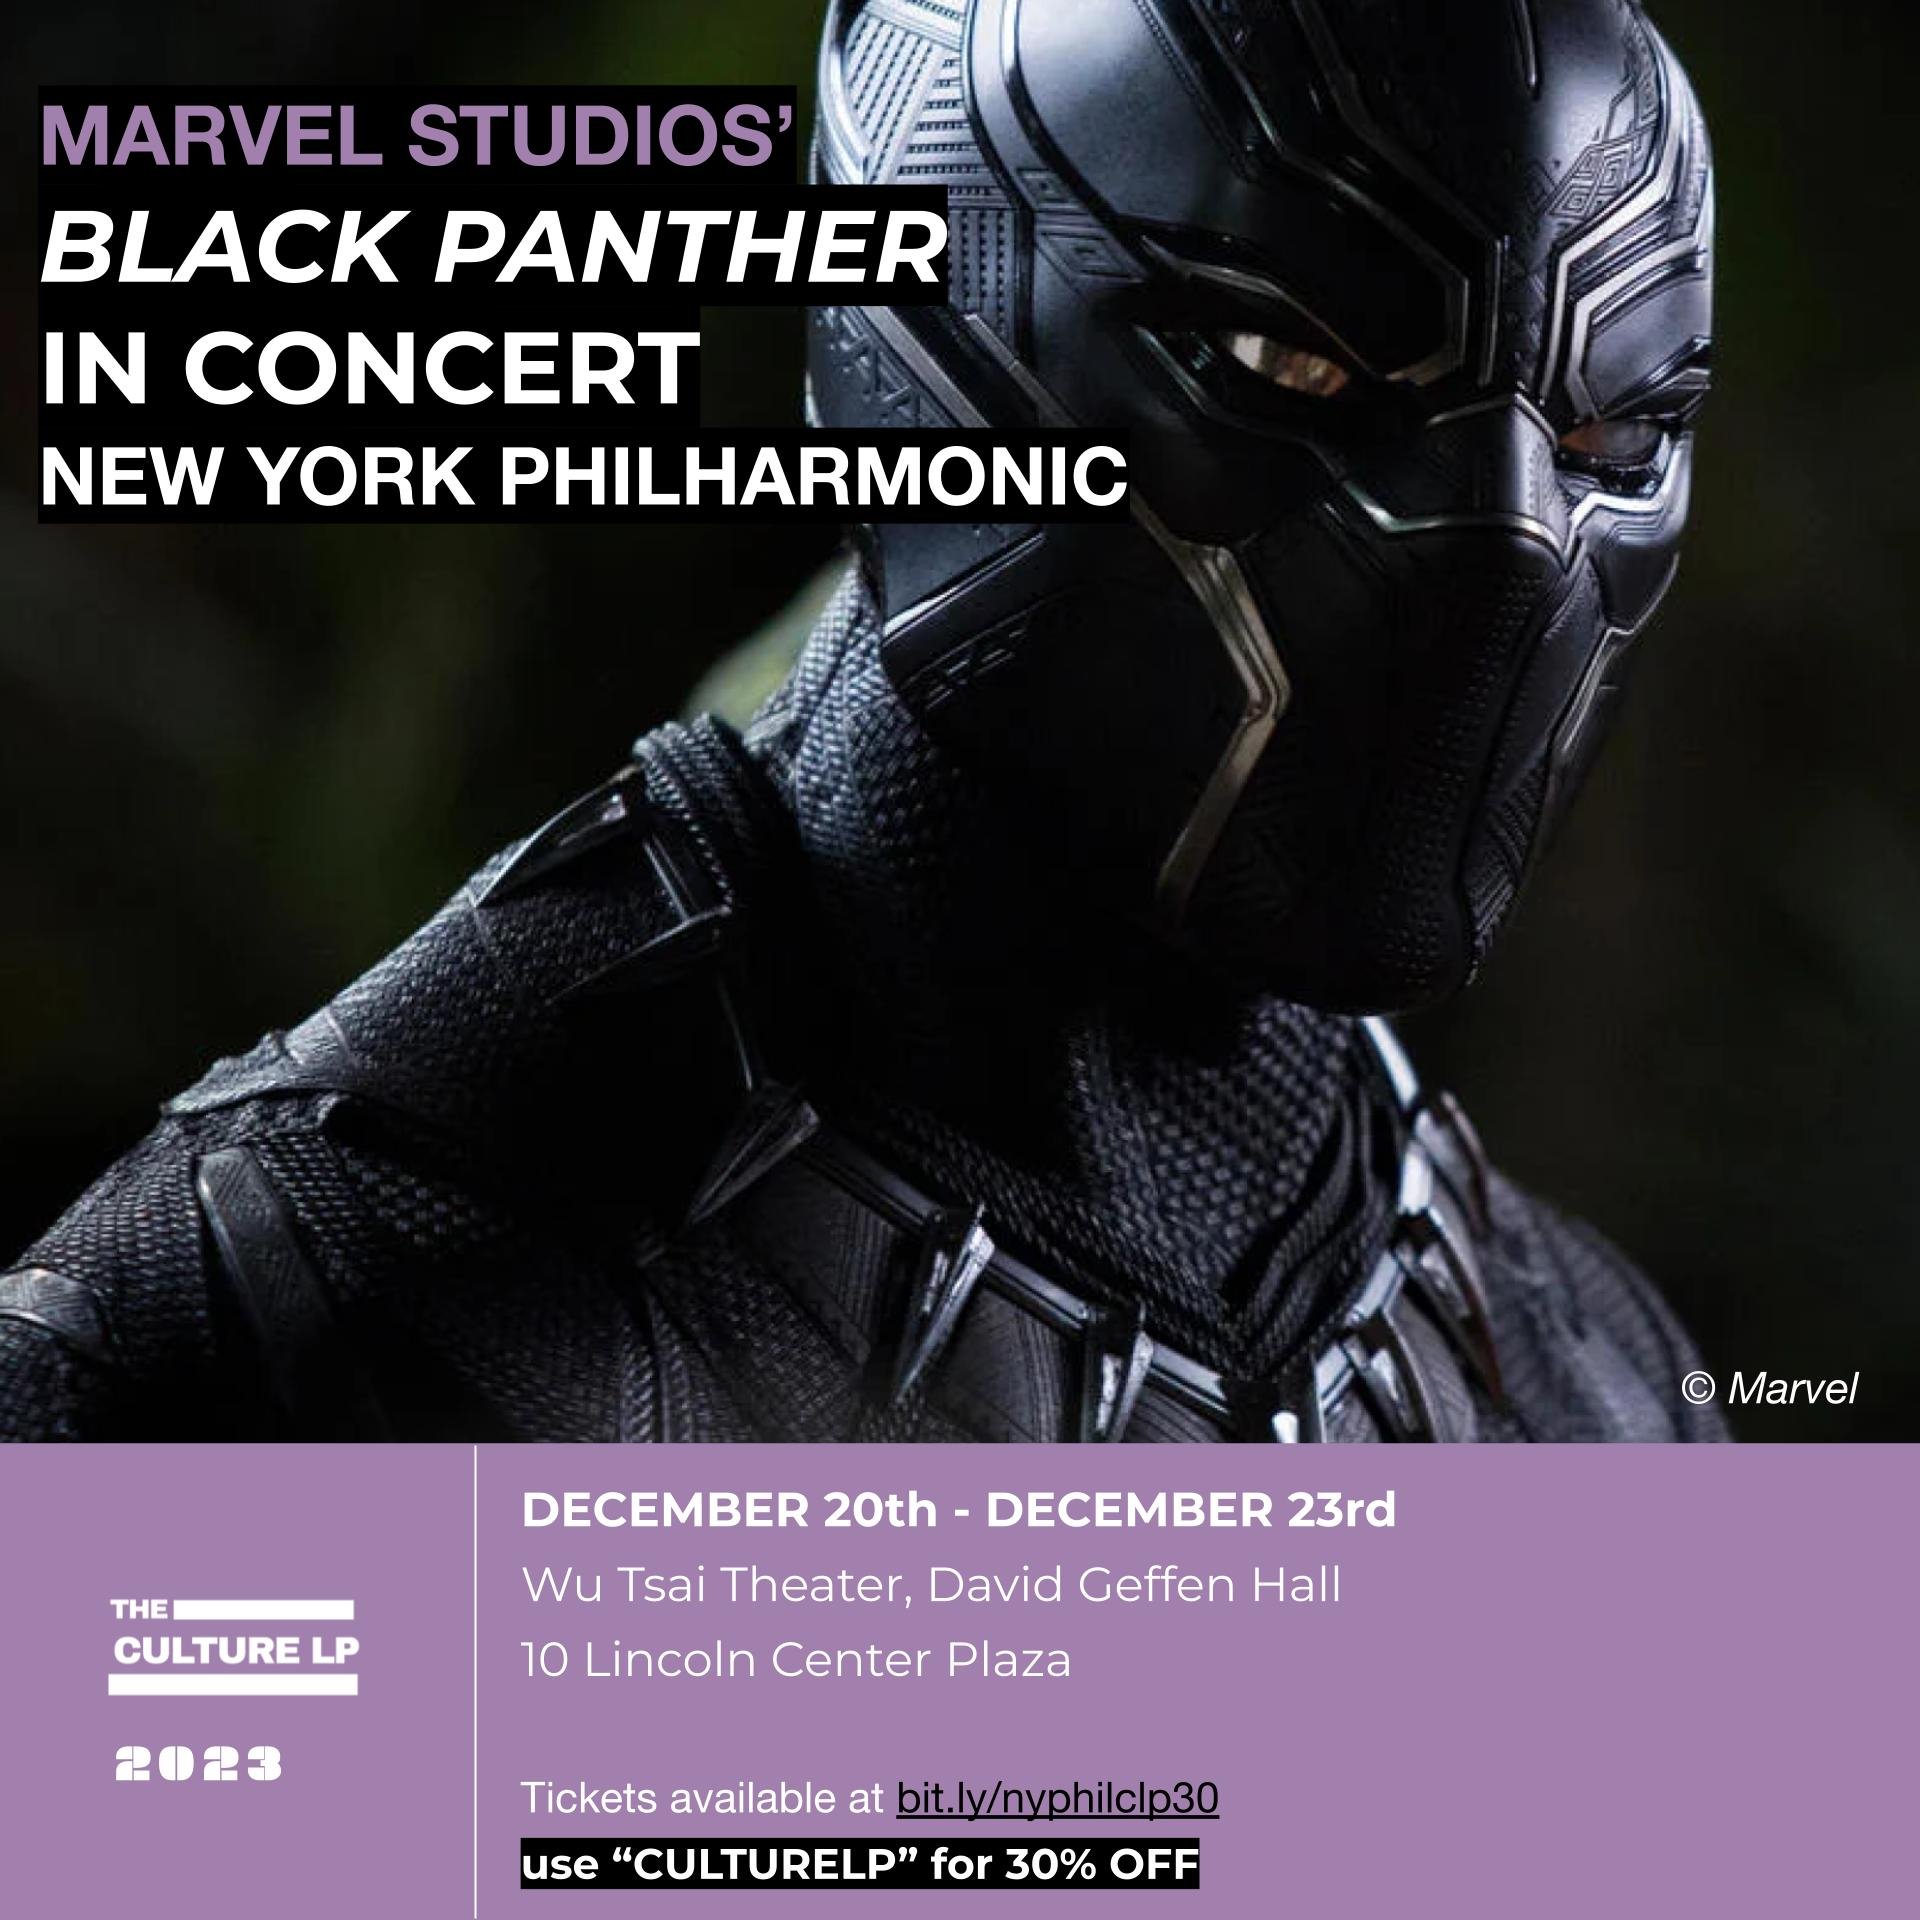 NYPWIN1123_BlackPantherGraphic Assets _Square_111423 v4.jpg